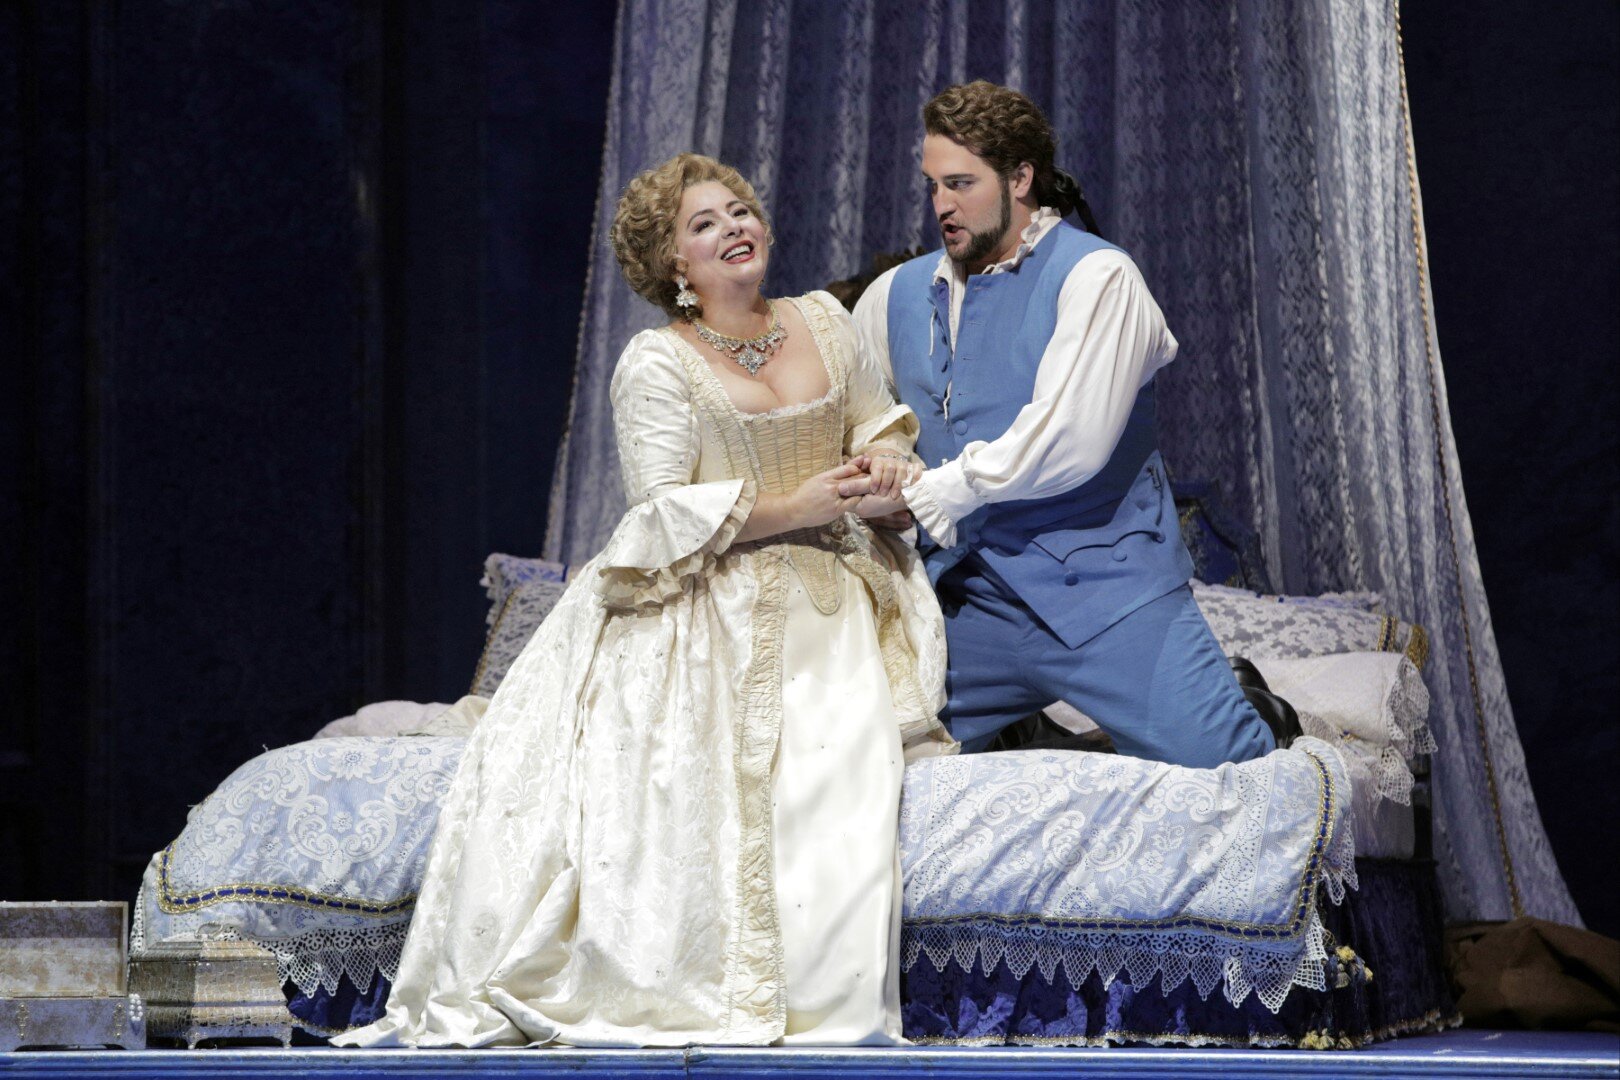  Lianna Haroutounian as Manon and Brian Jagde as Des Grieux 